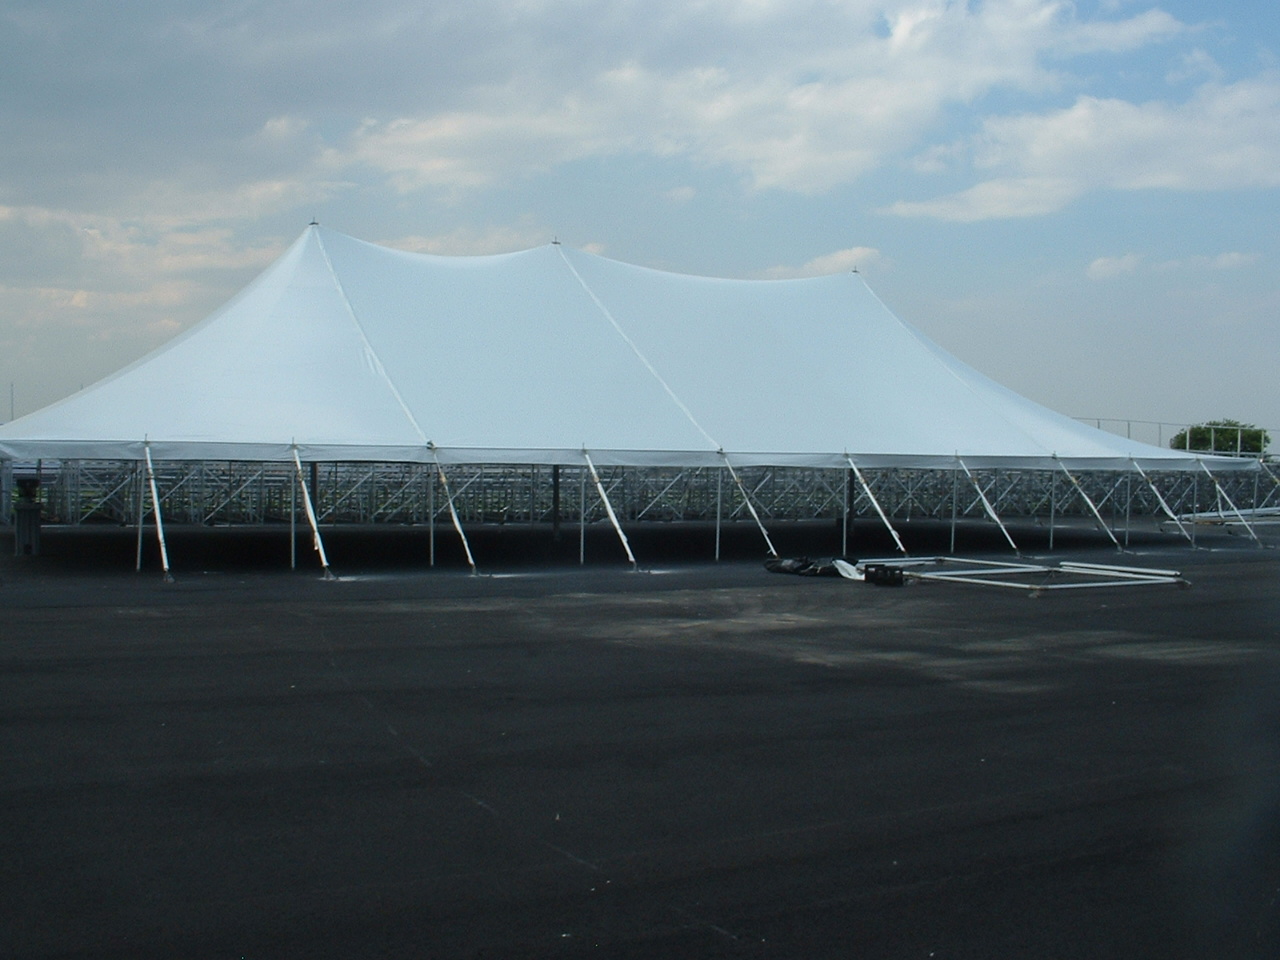 50ft EuroTent installed at an Airport in Brooklyn, New York